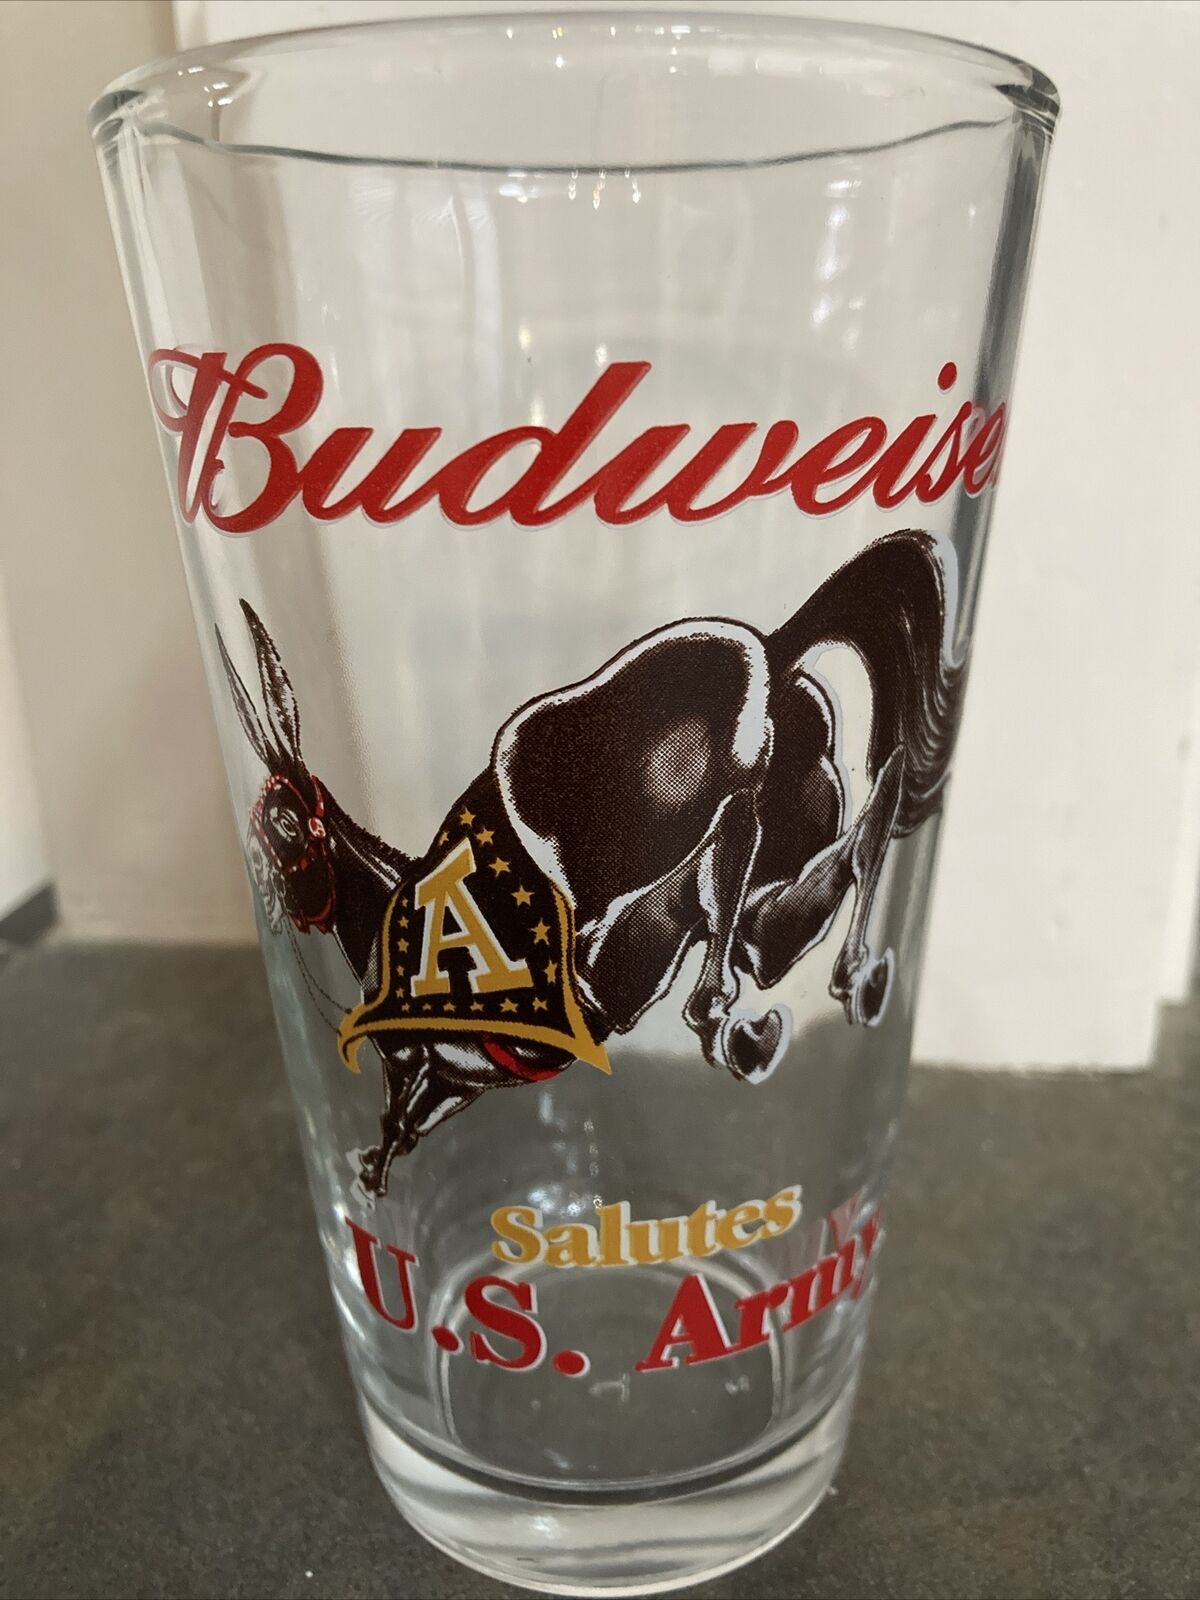 Vintage Budweiser Salutes US Army 16-ounce Beer Glass